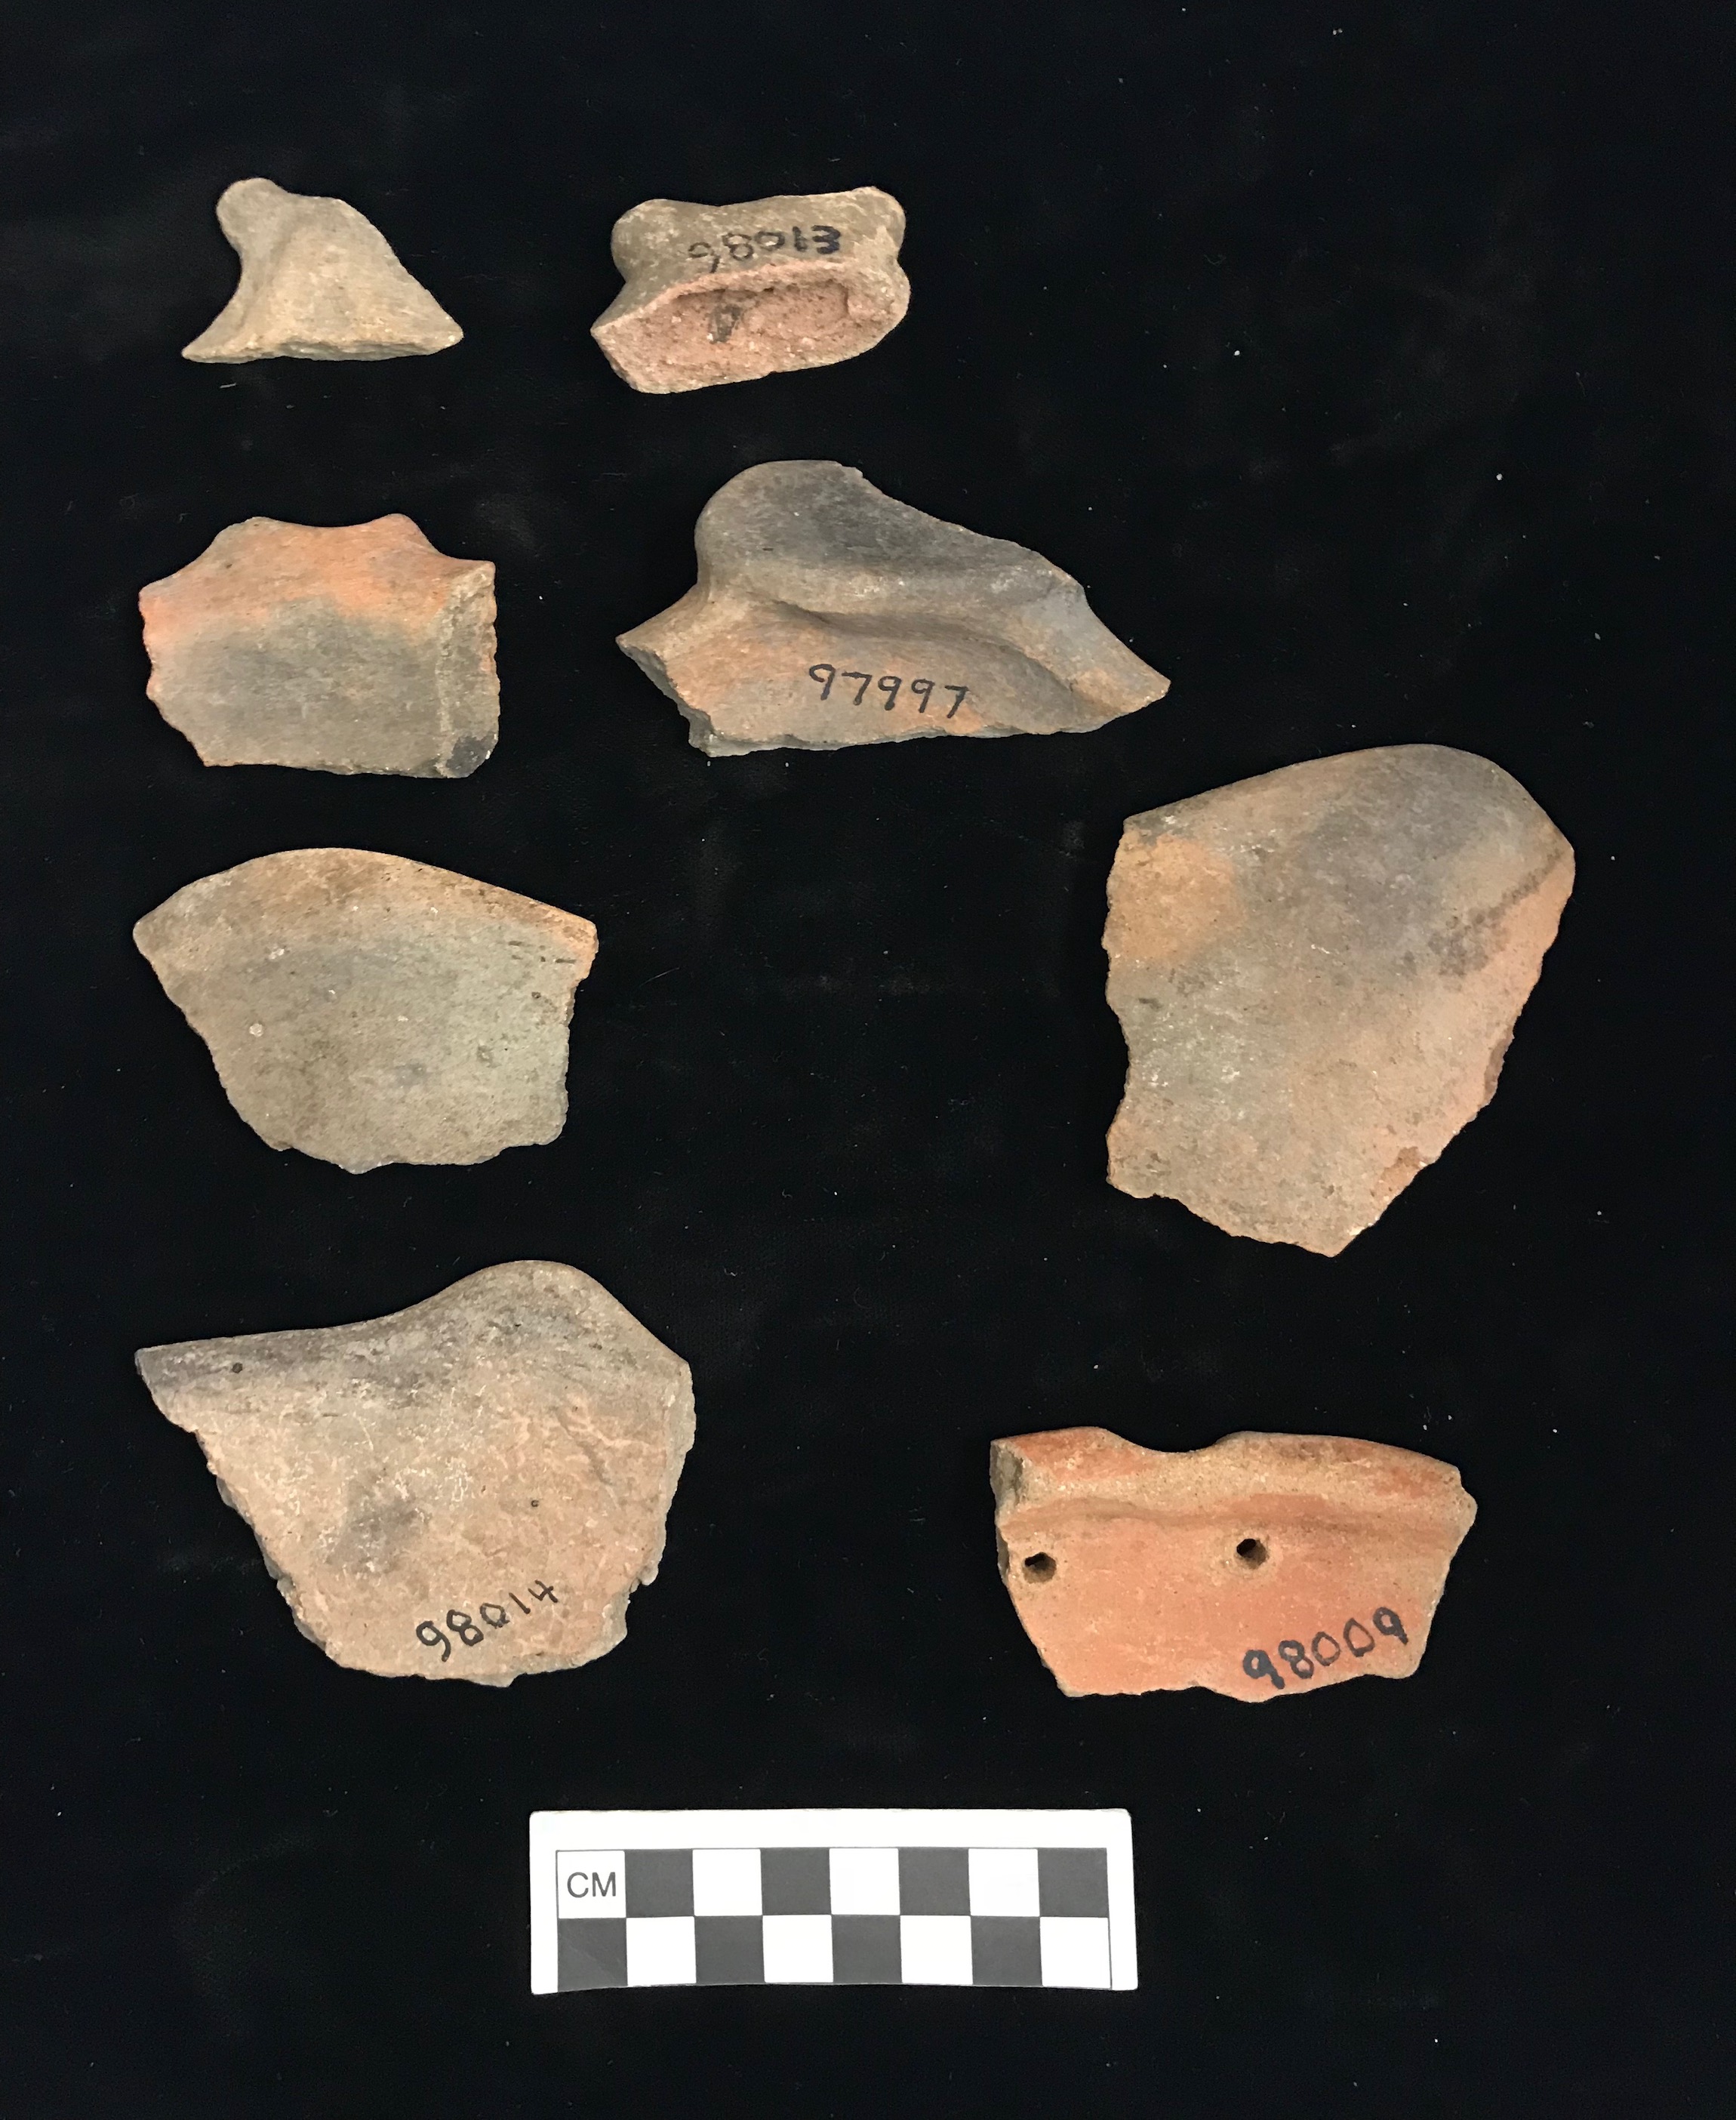 Plate XVII. CALIVINY RIM MODIFIED SHERDS. FLMNH Acc. Nos. 98009, 98013, 98014, and 97997. 